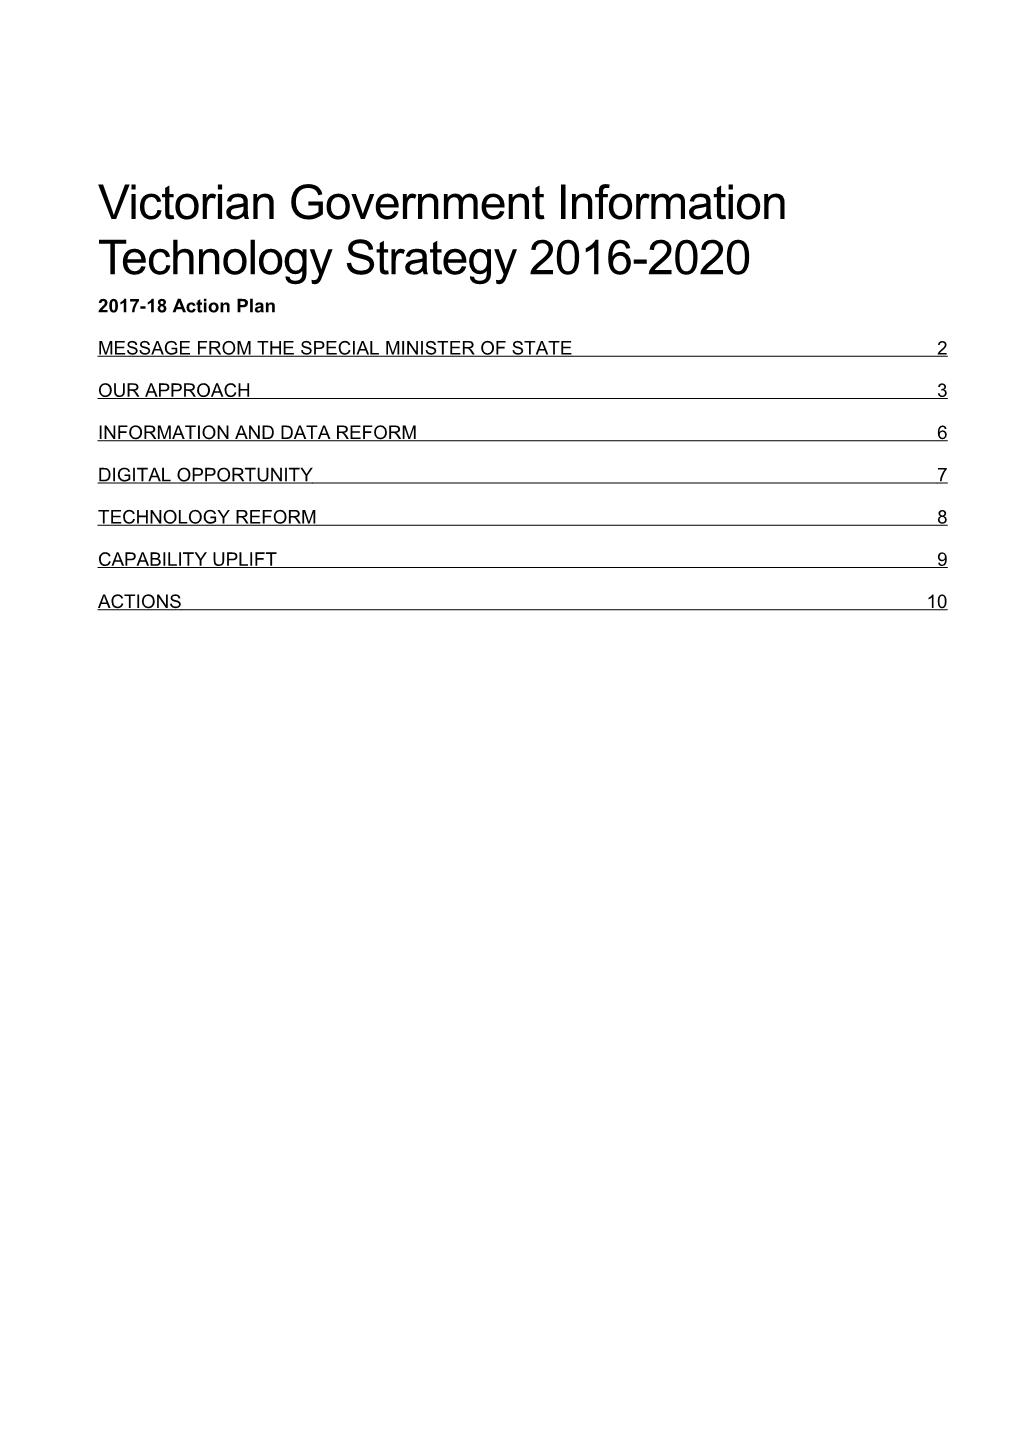 Victorian Government Information Technology Strategy 2016-2020 2017-18 Action Plan